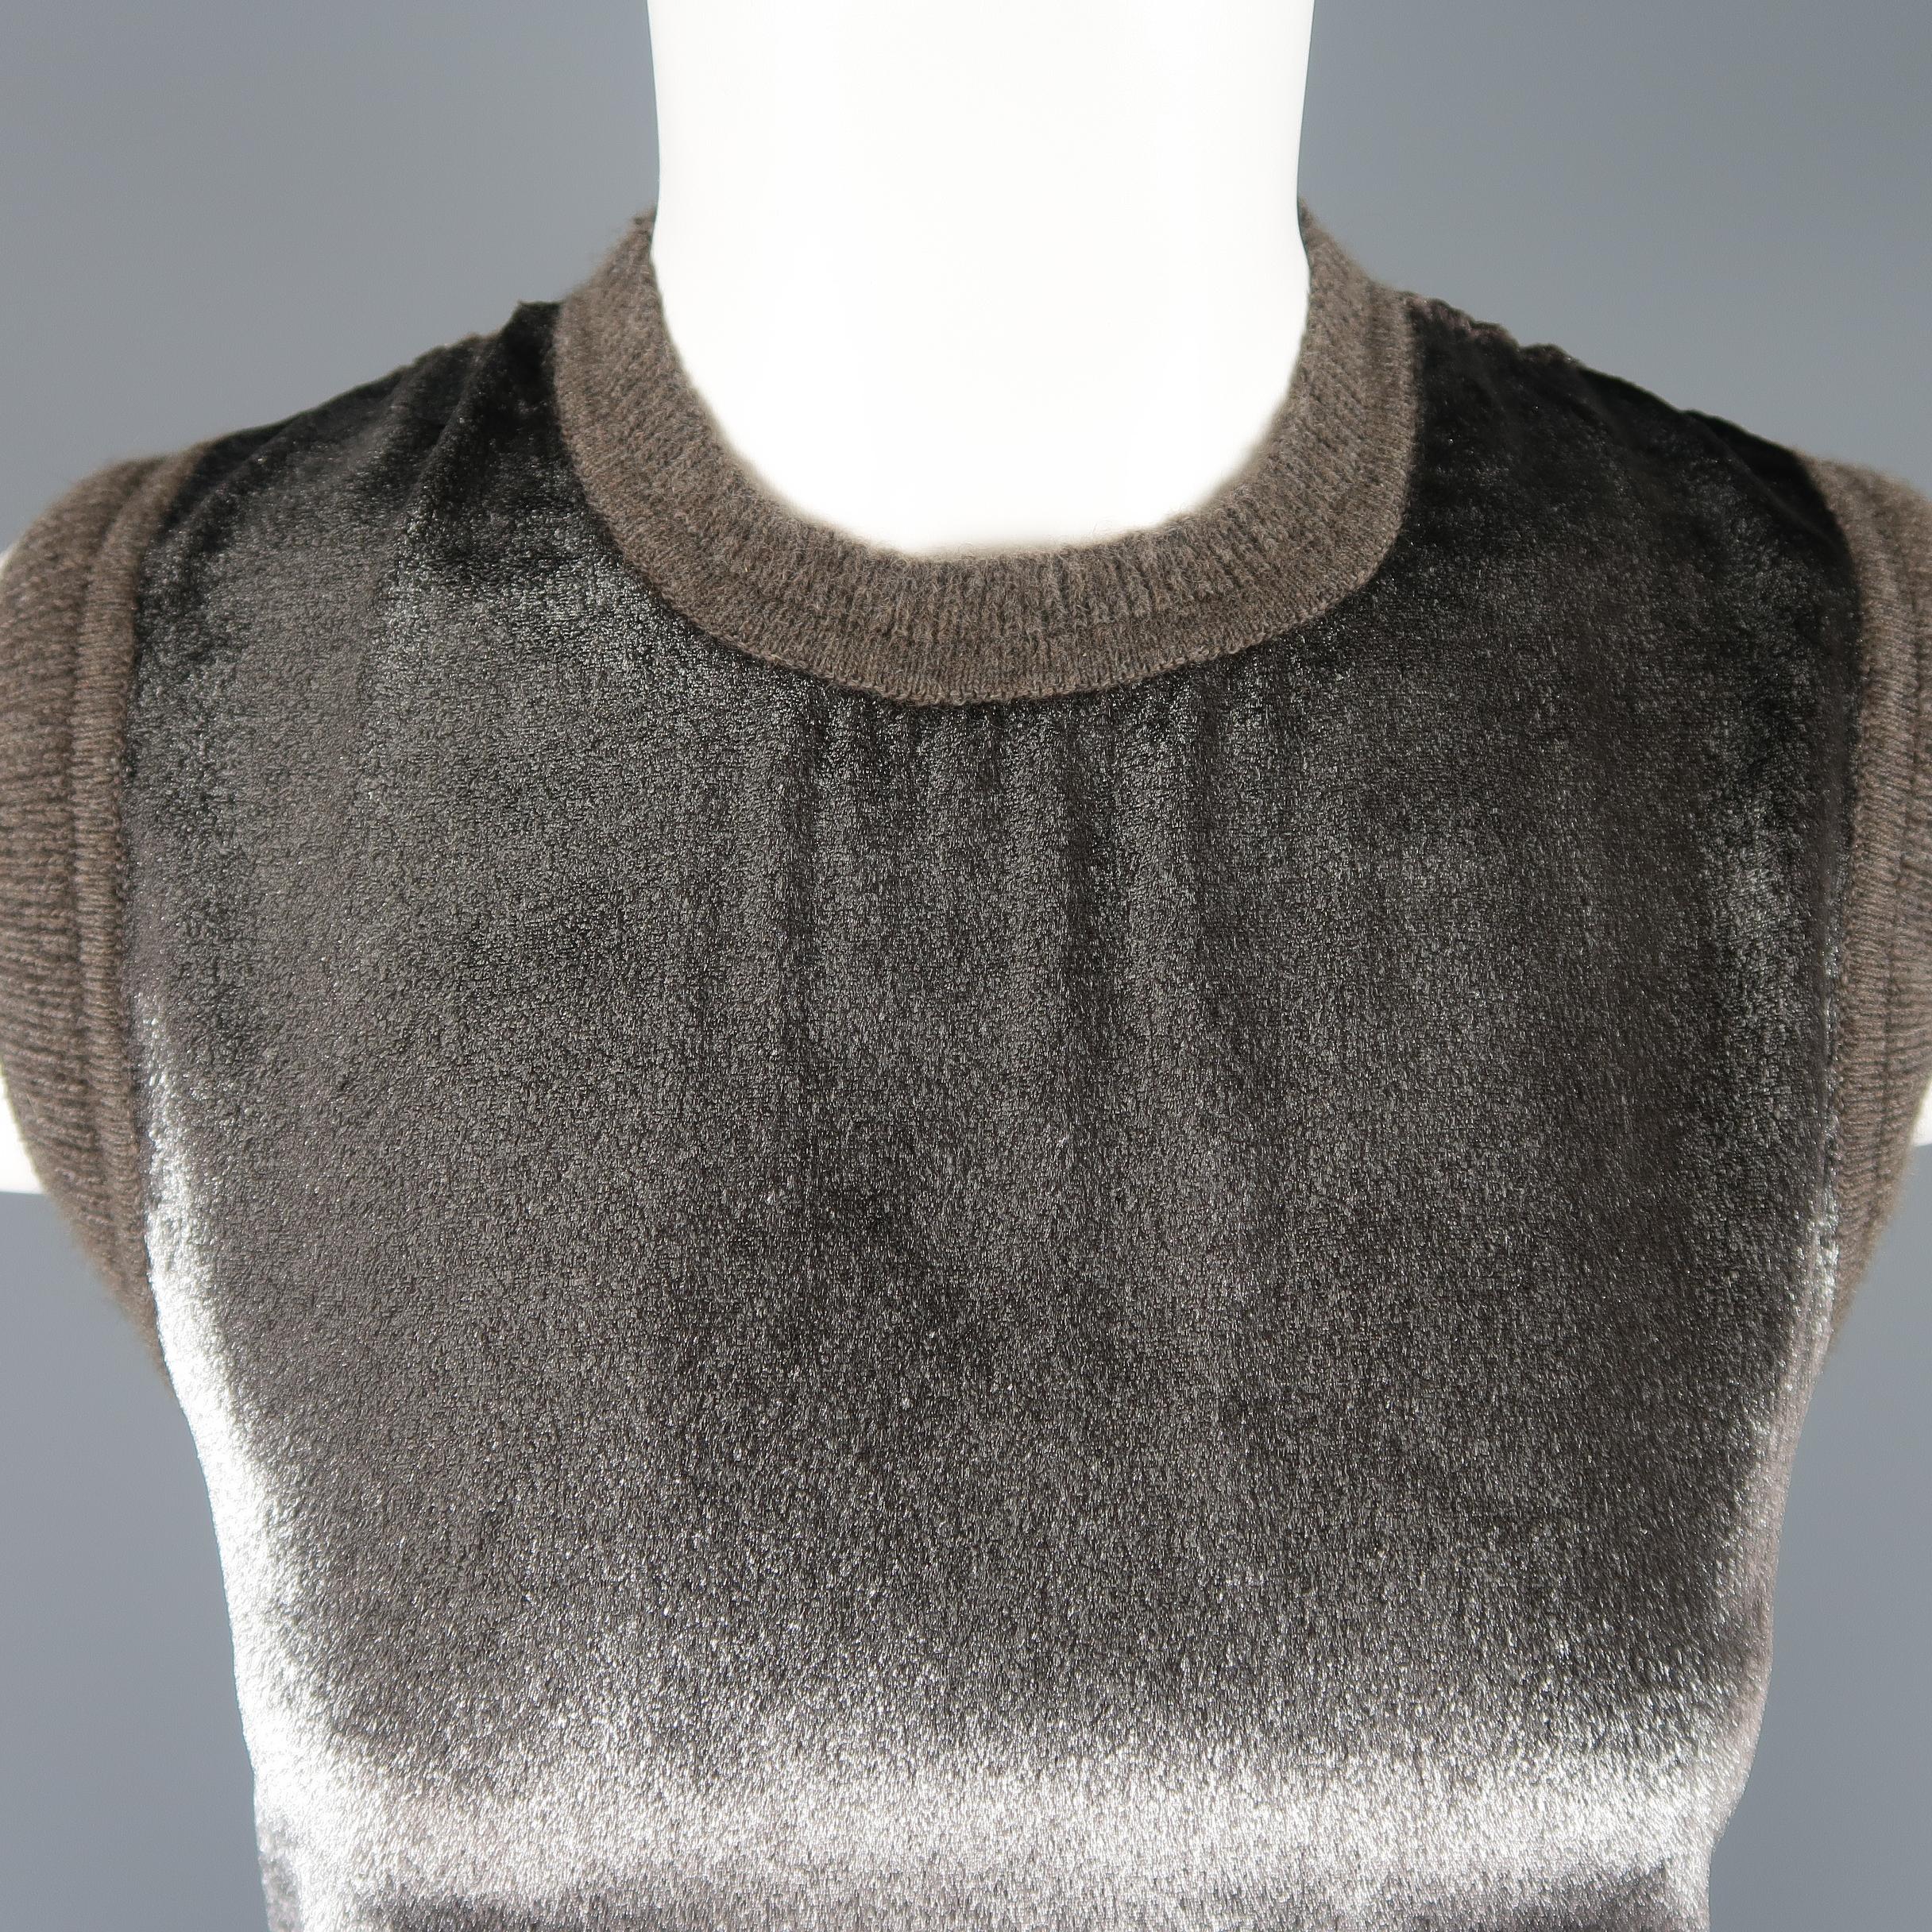 MAYET sweater vest top comes in taupe cashmere ribbed knit with a crewneck and silver metallic velvet frontal panel.
 
Excellent Pre-Owned Condition.
Marked: XS
 
Measurements:
 
Shoulder: 13.5 in.
Bust: 34 in.
Length: 22 in.